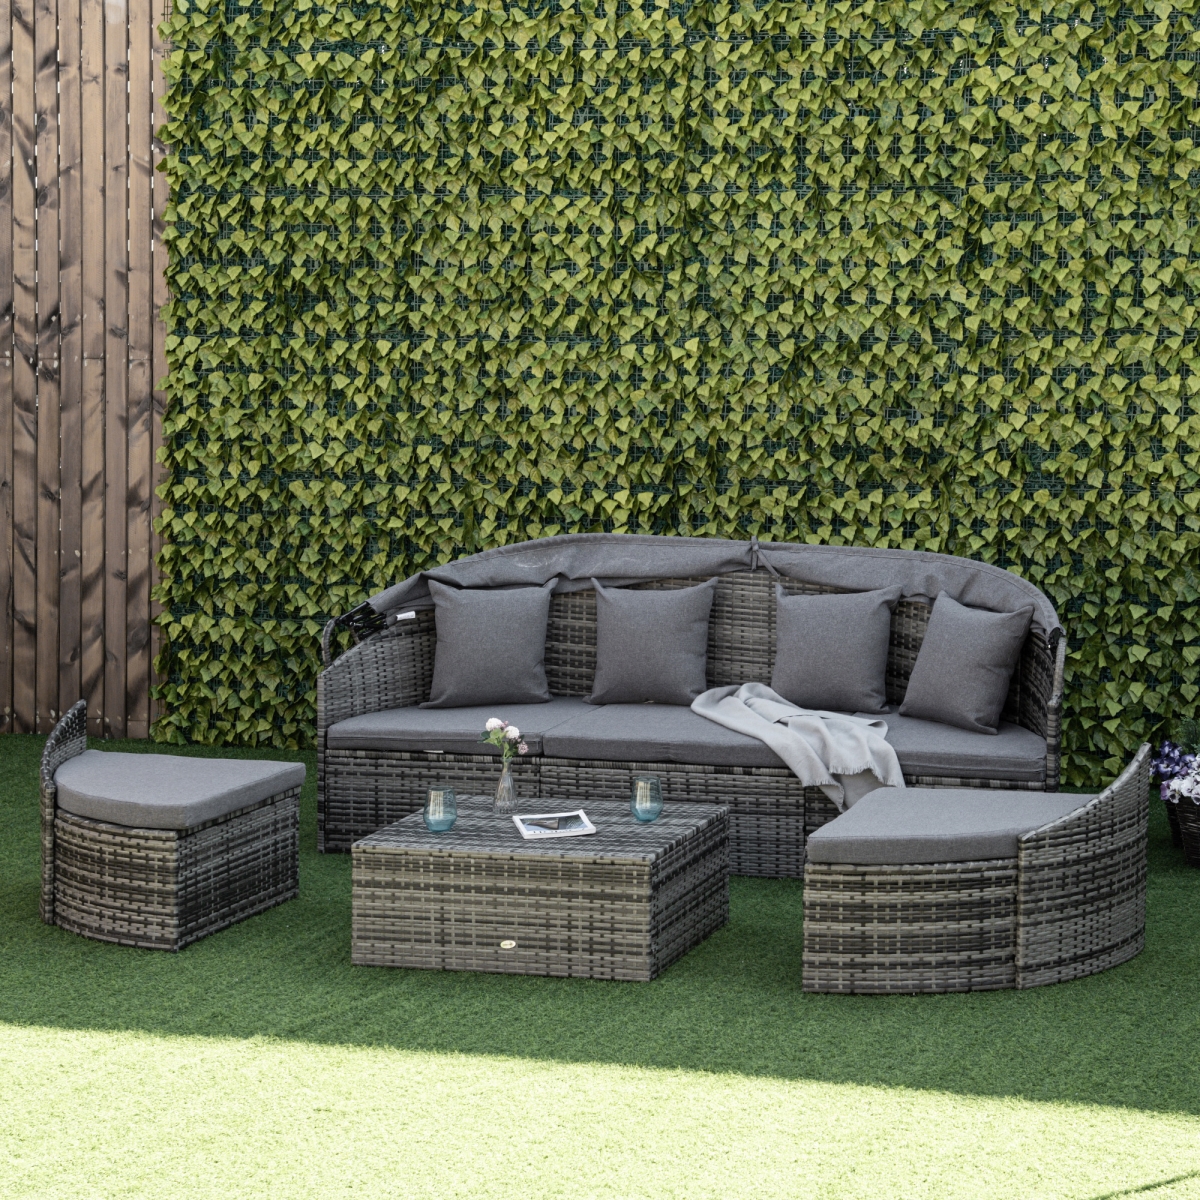 Picture of 212 Main 862-048LG Wicker Outdoor Rattan Sofa with Canopy Cushions Pillows Patio Bed Sets for Lawn&#44; Garden & Poolside Outsunny Outdoor Round Daybed&#44; Gray - 4 Piece